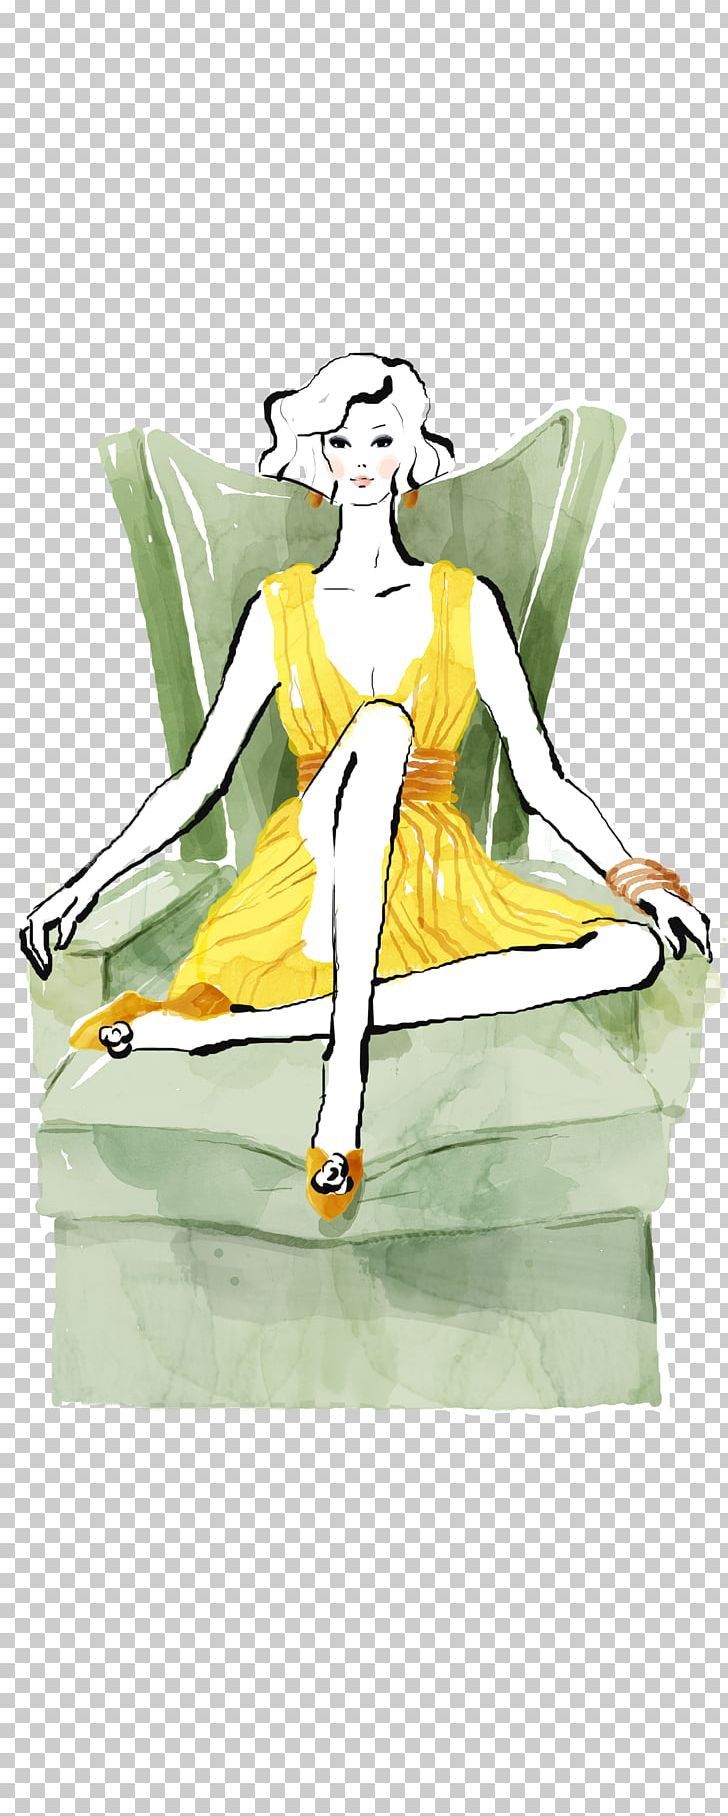 Couch Woman Computer File PNG, Clipart, Beauty, Beauty Salon, Business Woman, Cartoon, Chair Free PNG Download